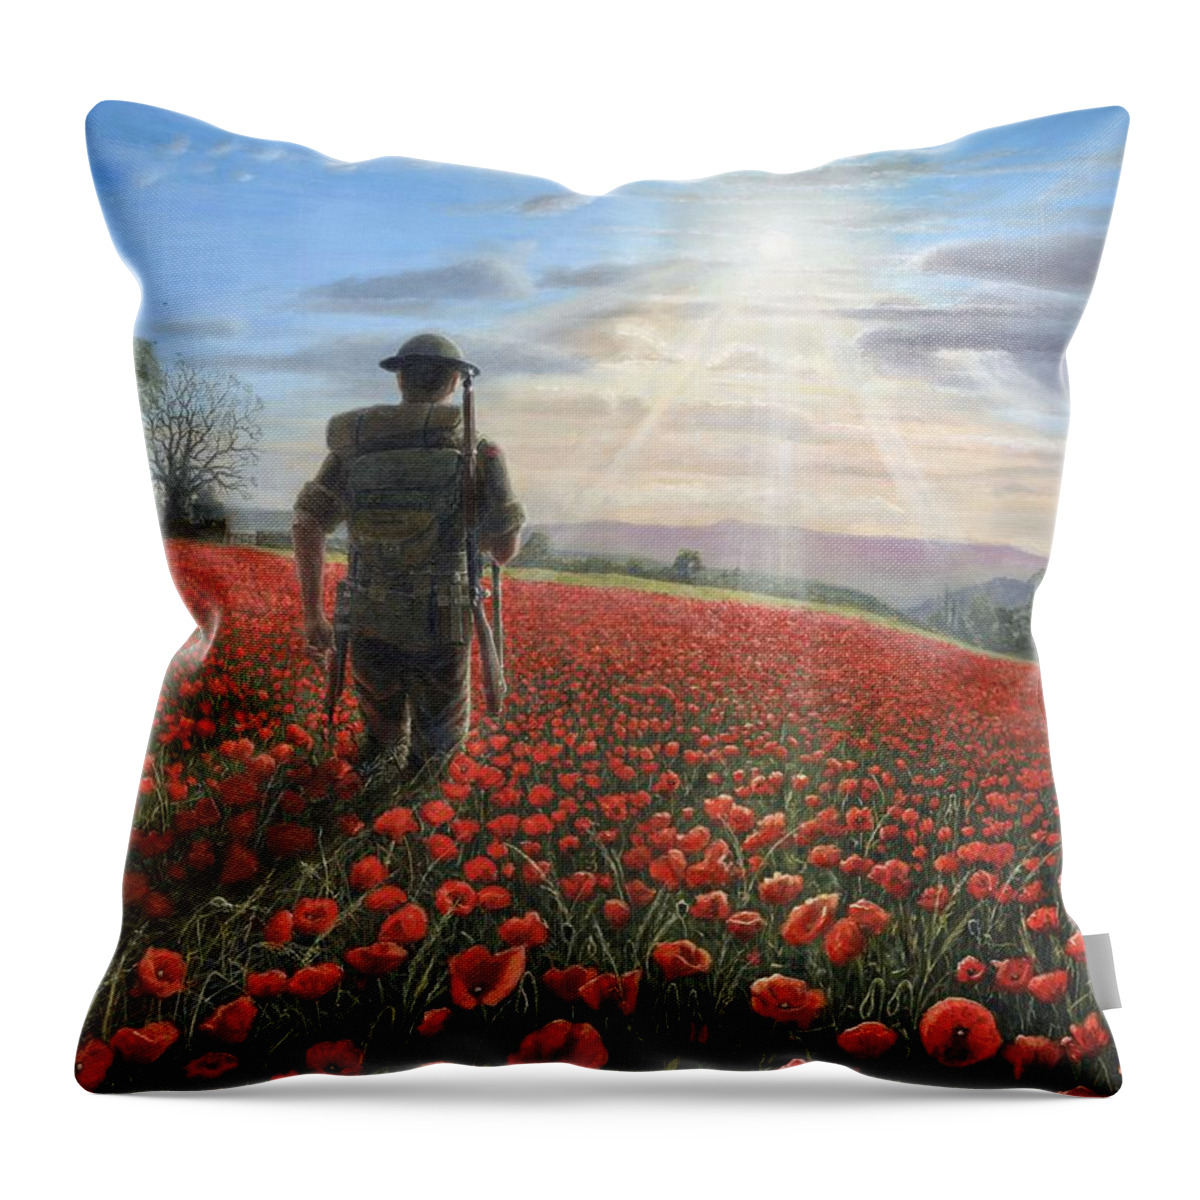 Landscape Throw Pillow featuring the painting Tommy by Richard Harpum